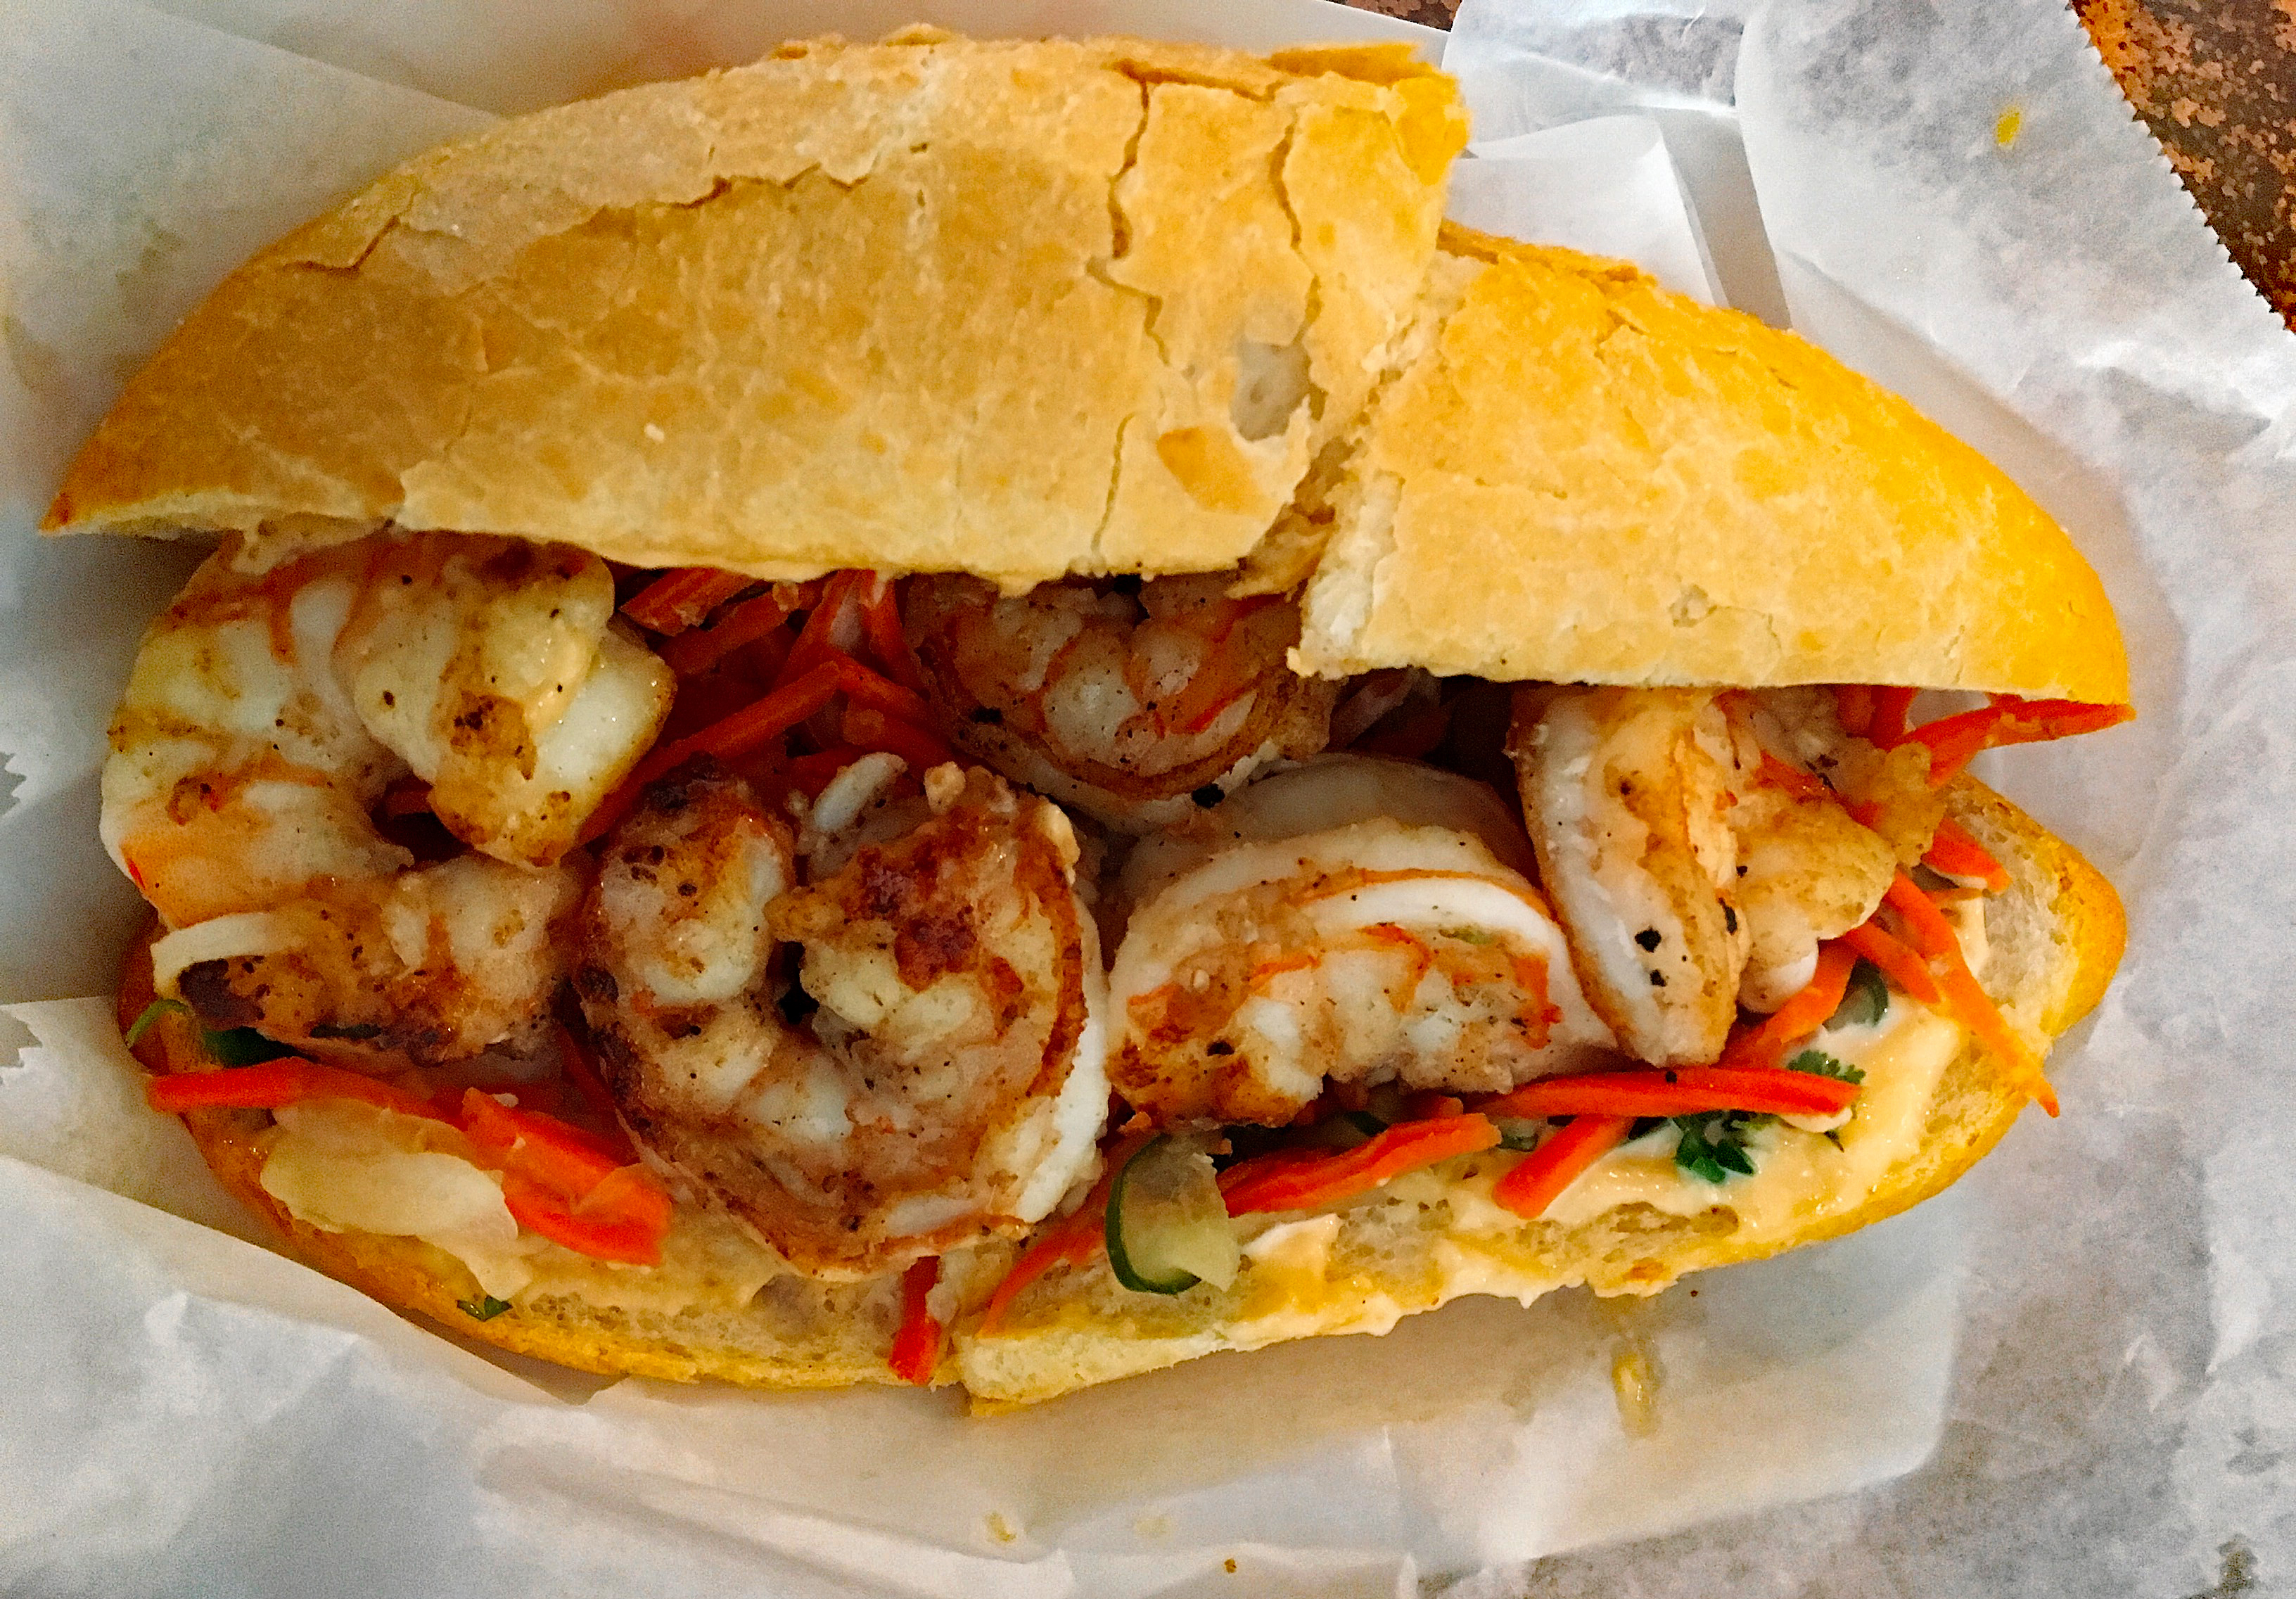 Long bun is packed with seared shrimp and colorful garnishes